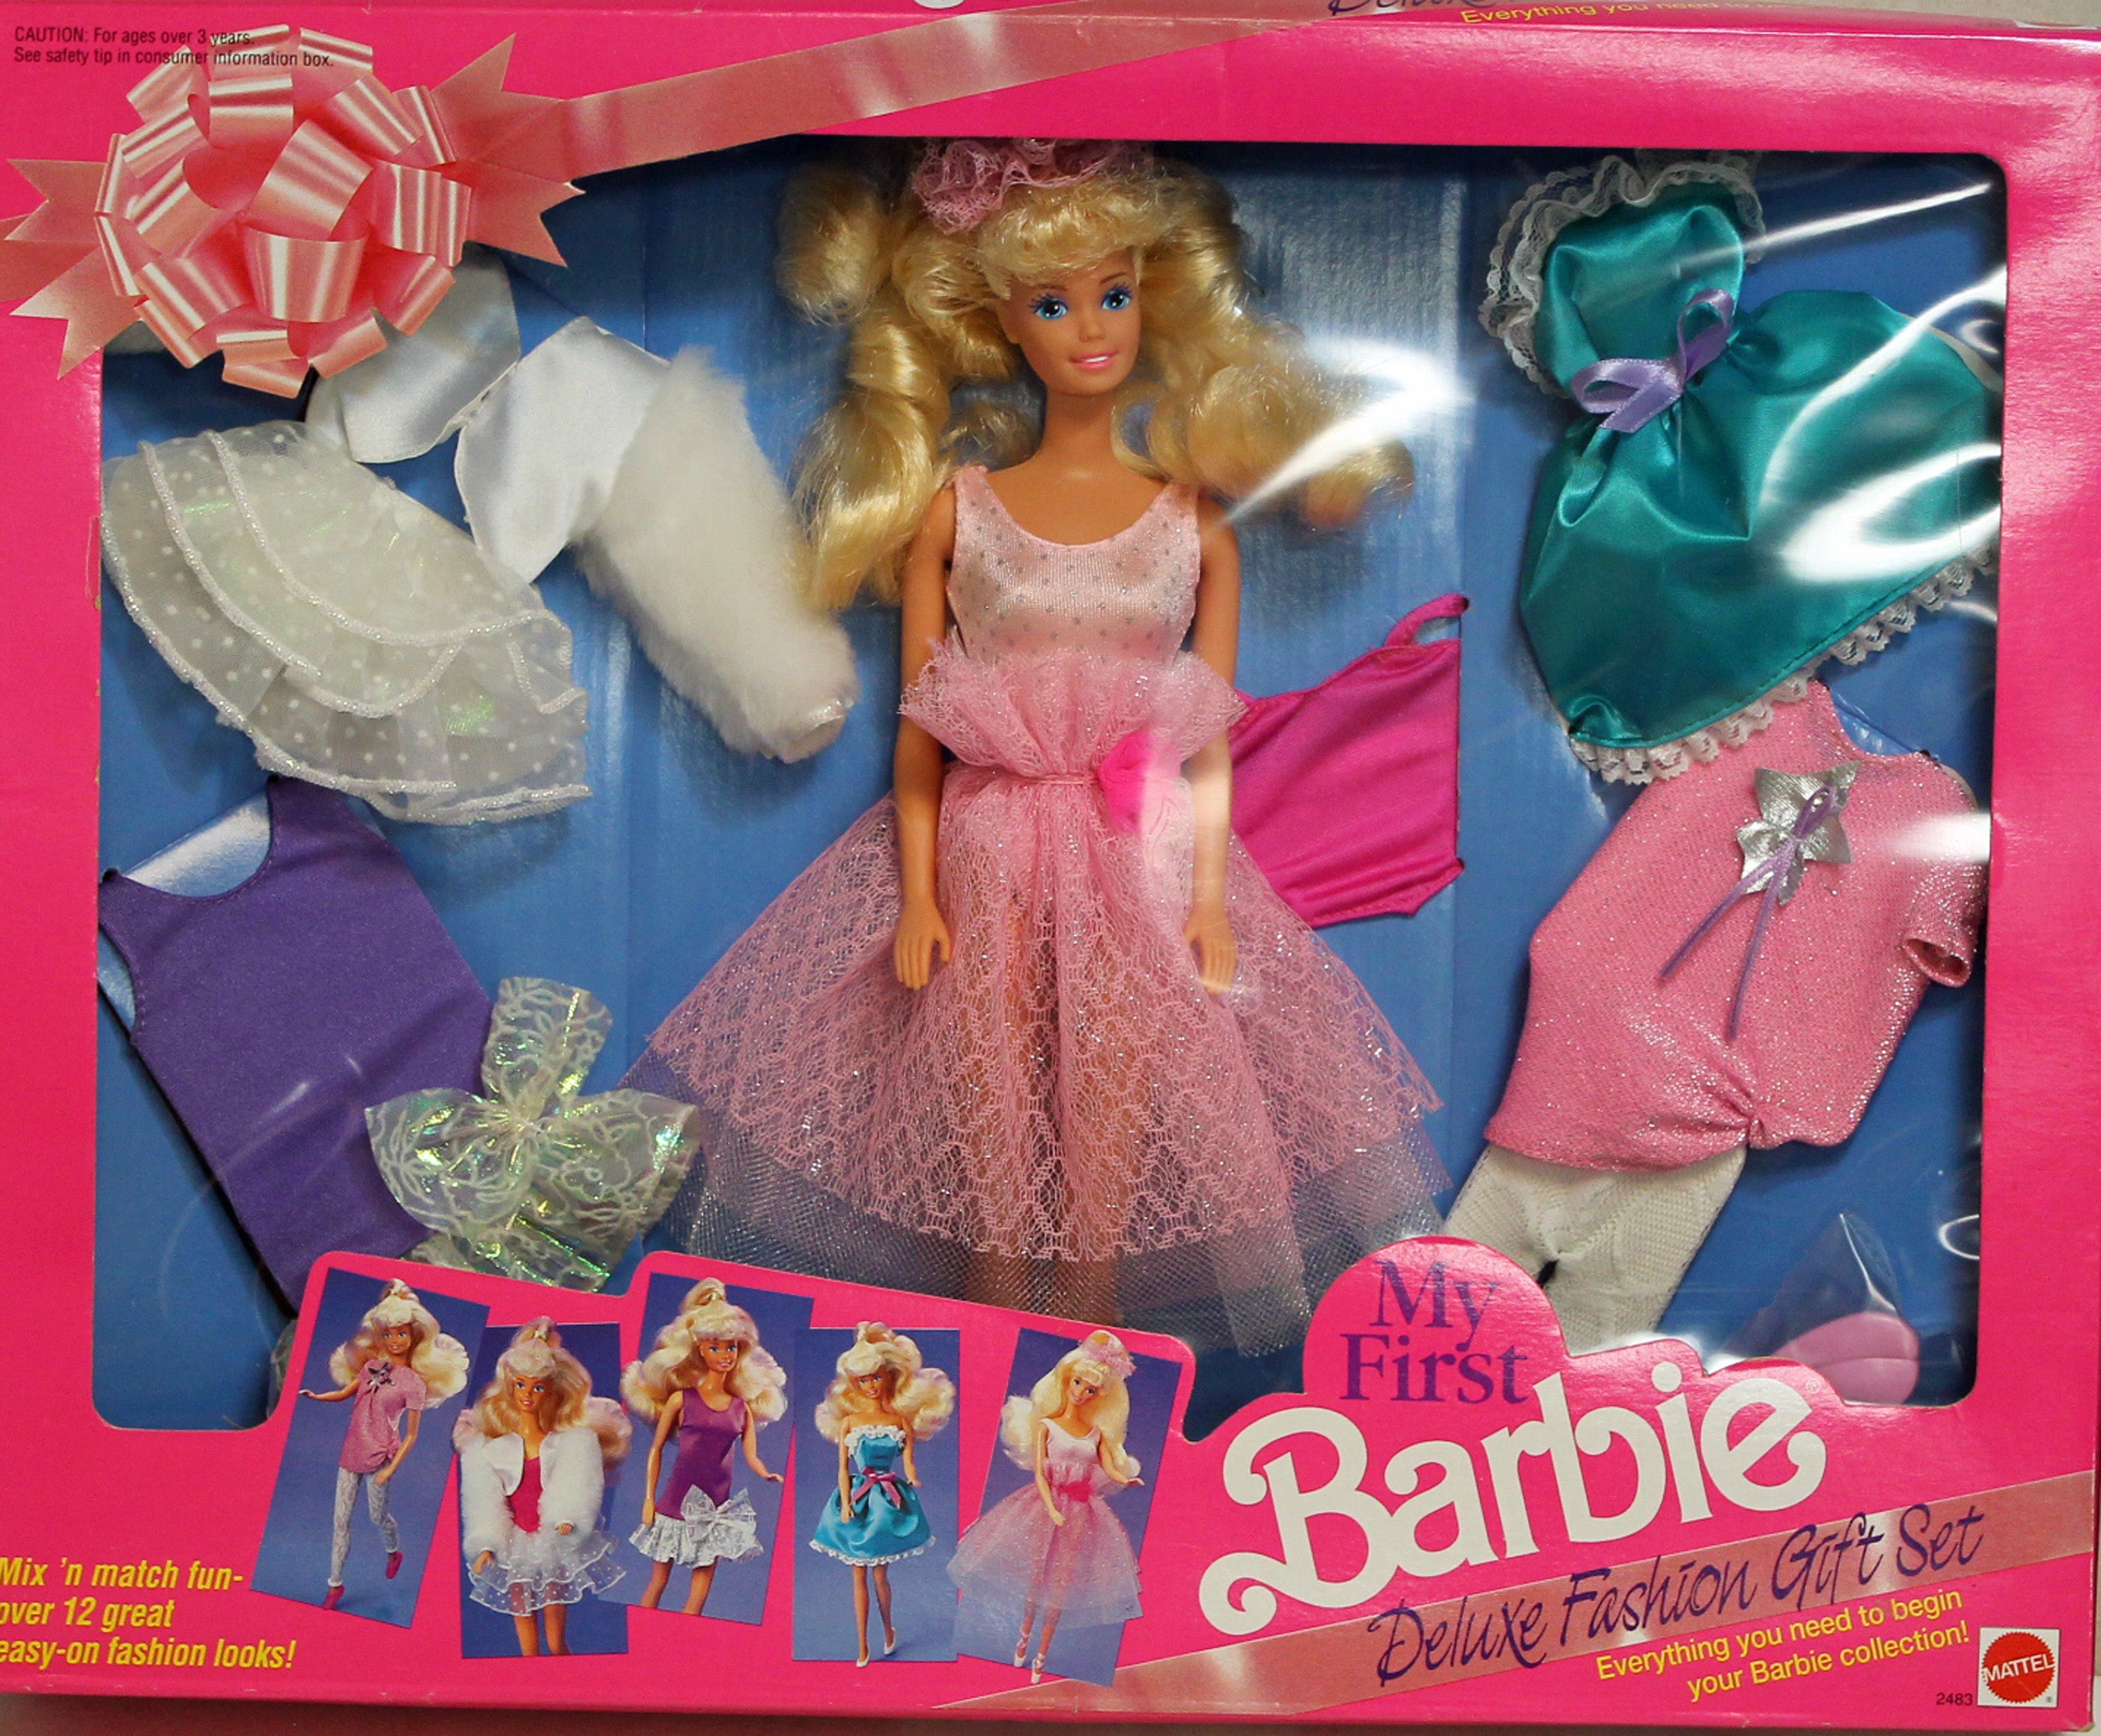 Modsatte akavet Revival 1991 My First Barbie Deluxe Fashion Gift Set – Sell4Value